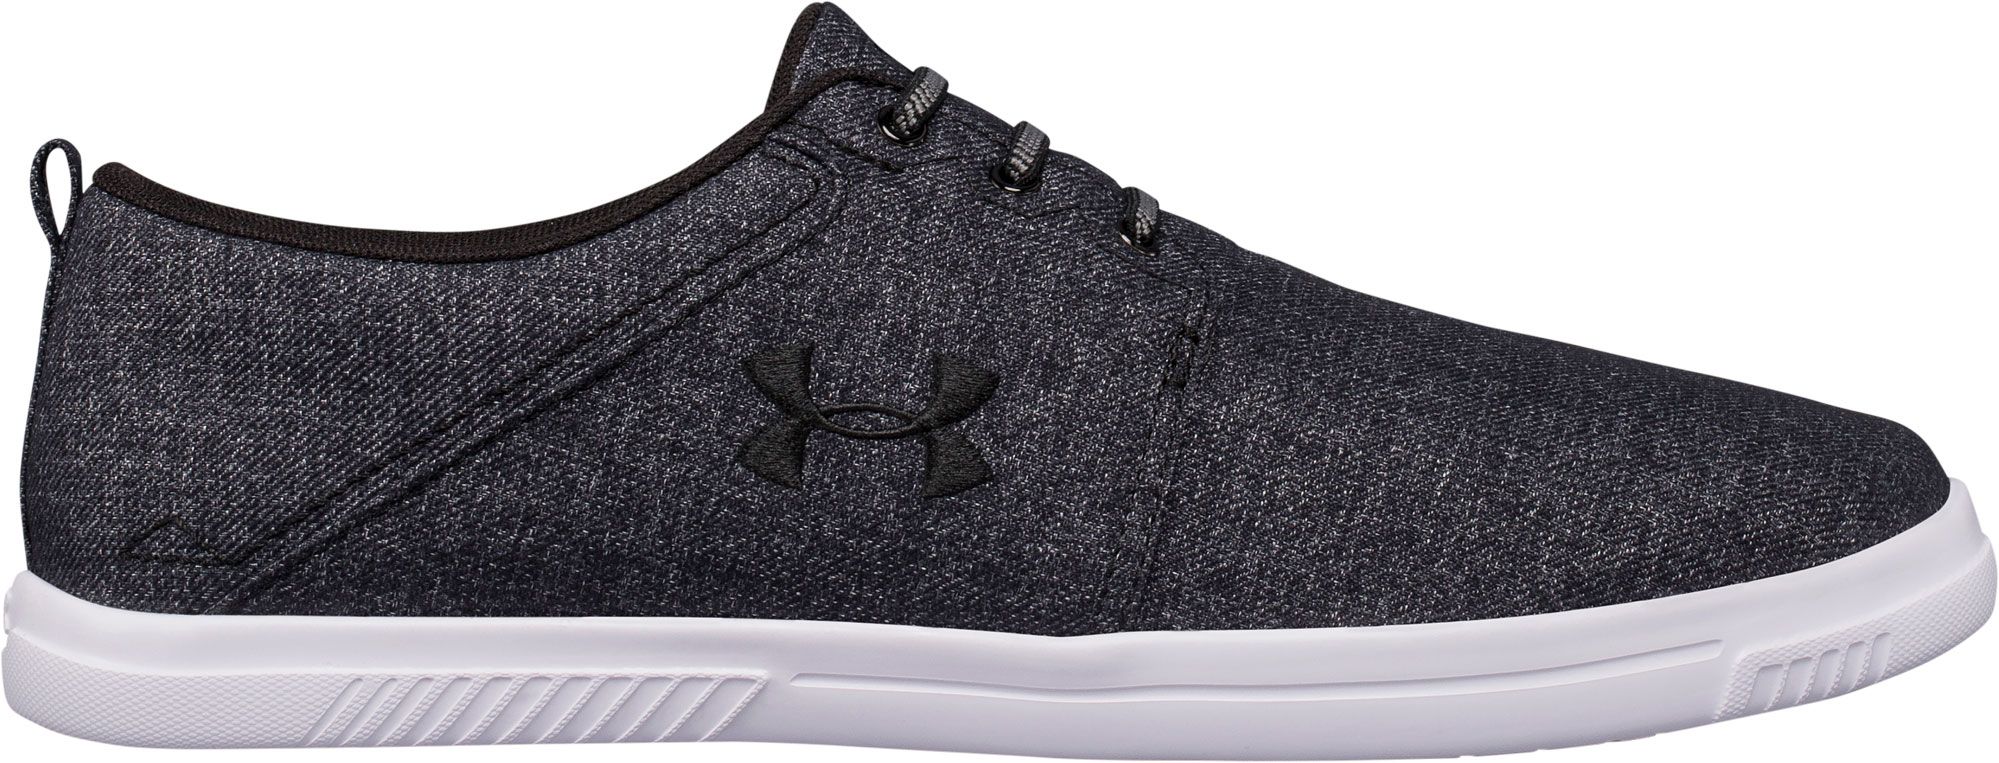 under armour mens slip on shoes